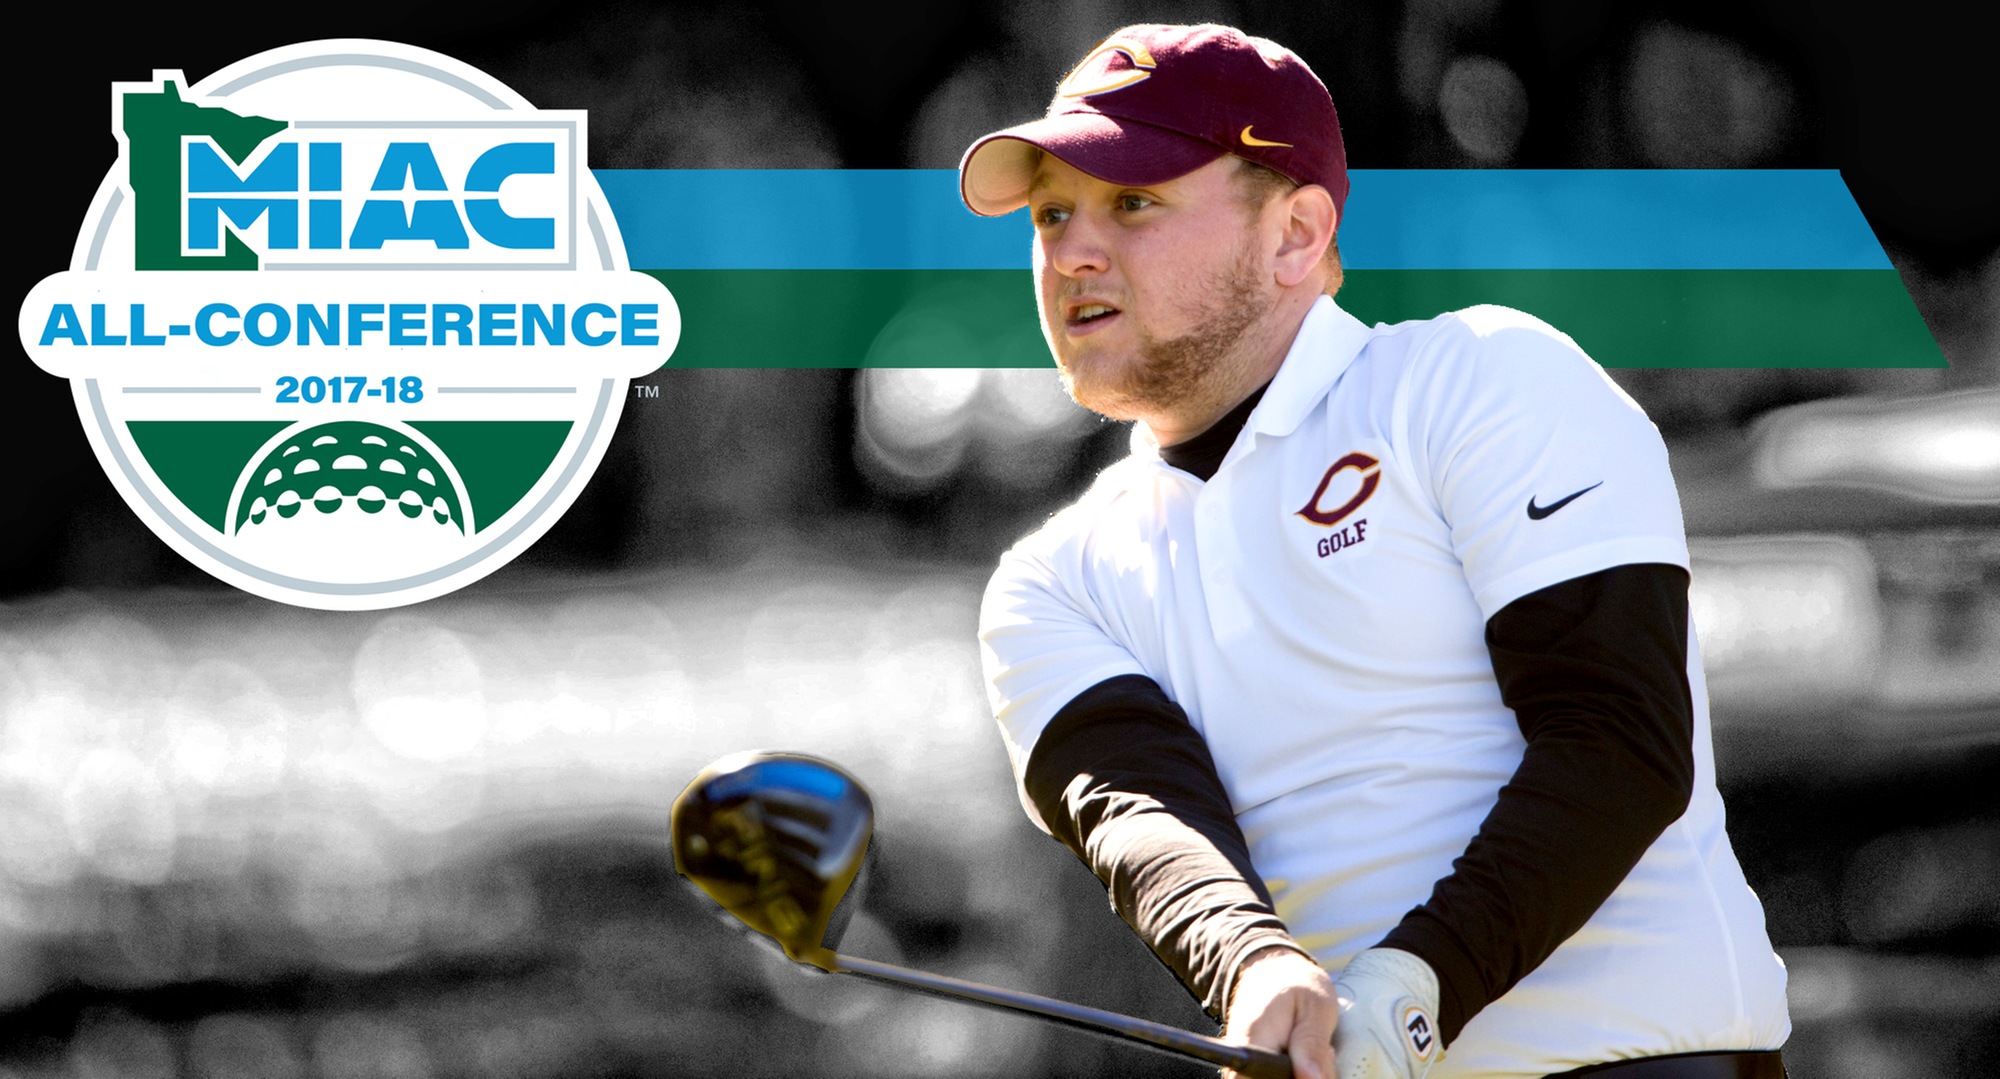 Junior Nate Kahlbaugh was officially named to the MIAC All-Conference team becoming the 12th Cobber to earn All-Conference honors since 2008.